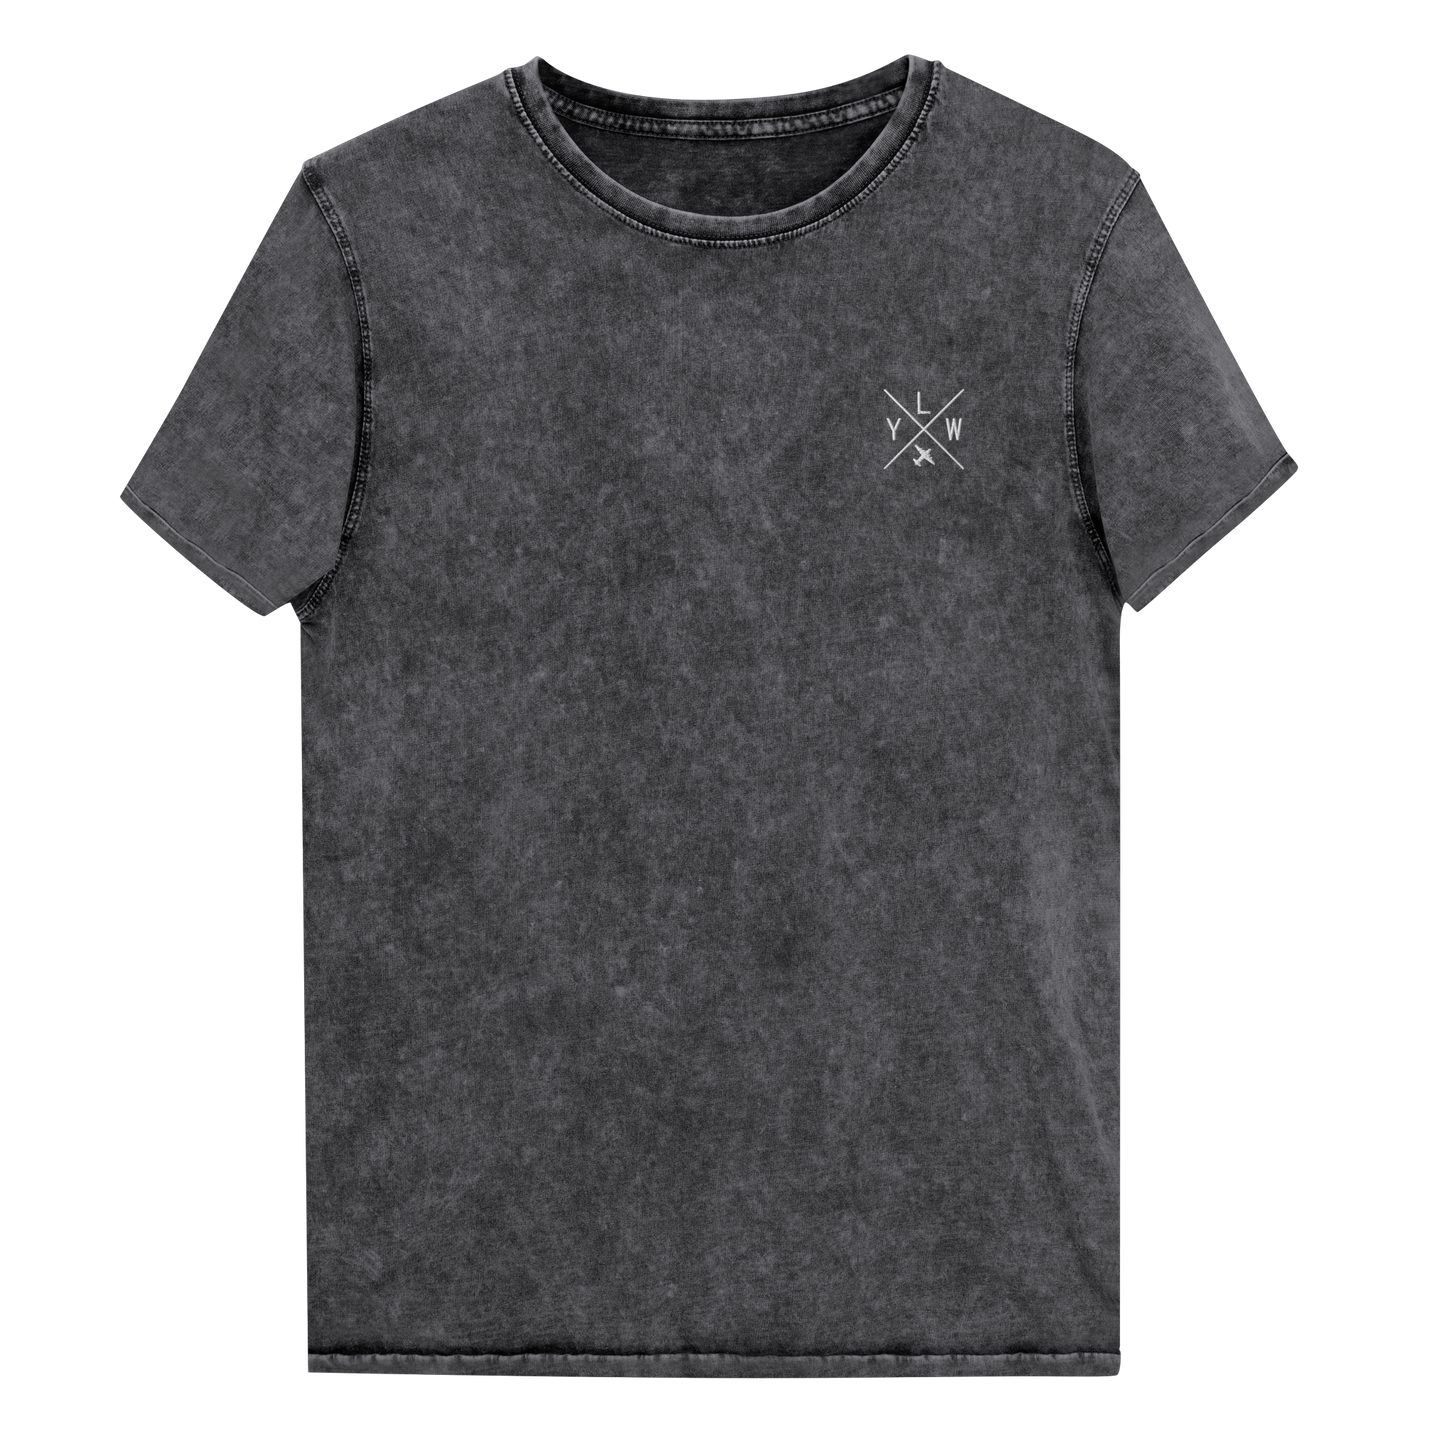 YHM Designs - YLW Kelowna Denim T-Shirt - Crossed-X Design with Airport Code and Vintage Propliner - White Embroidery - Image 02